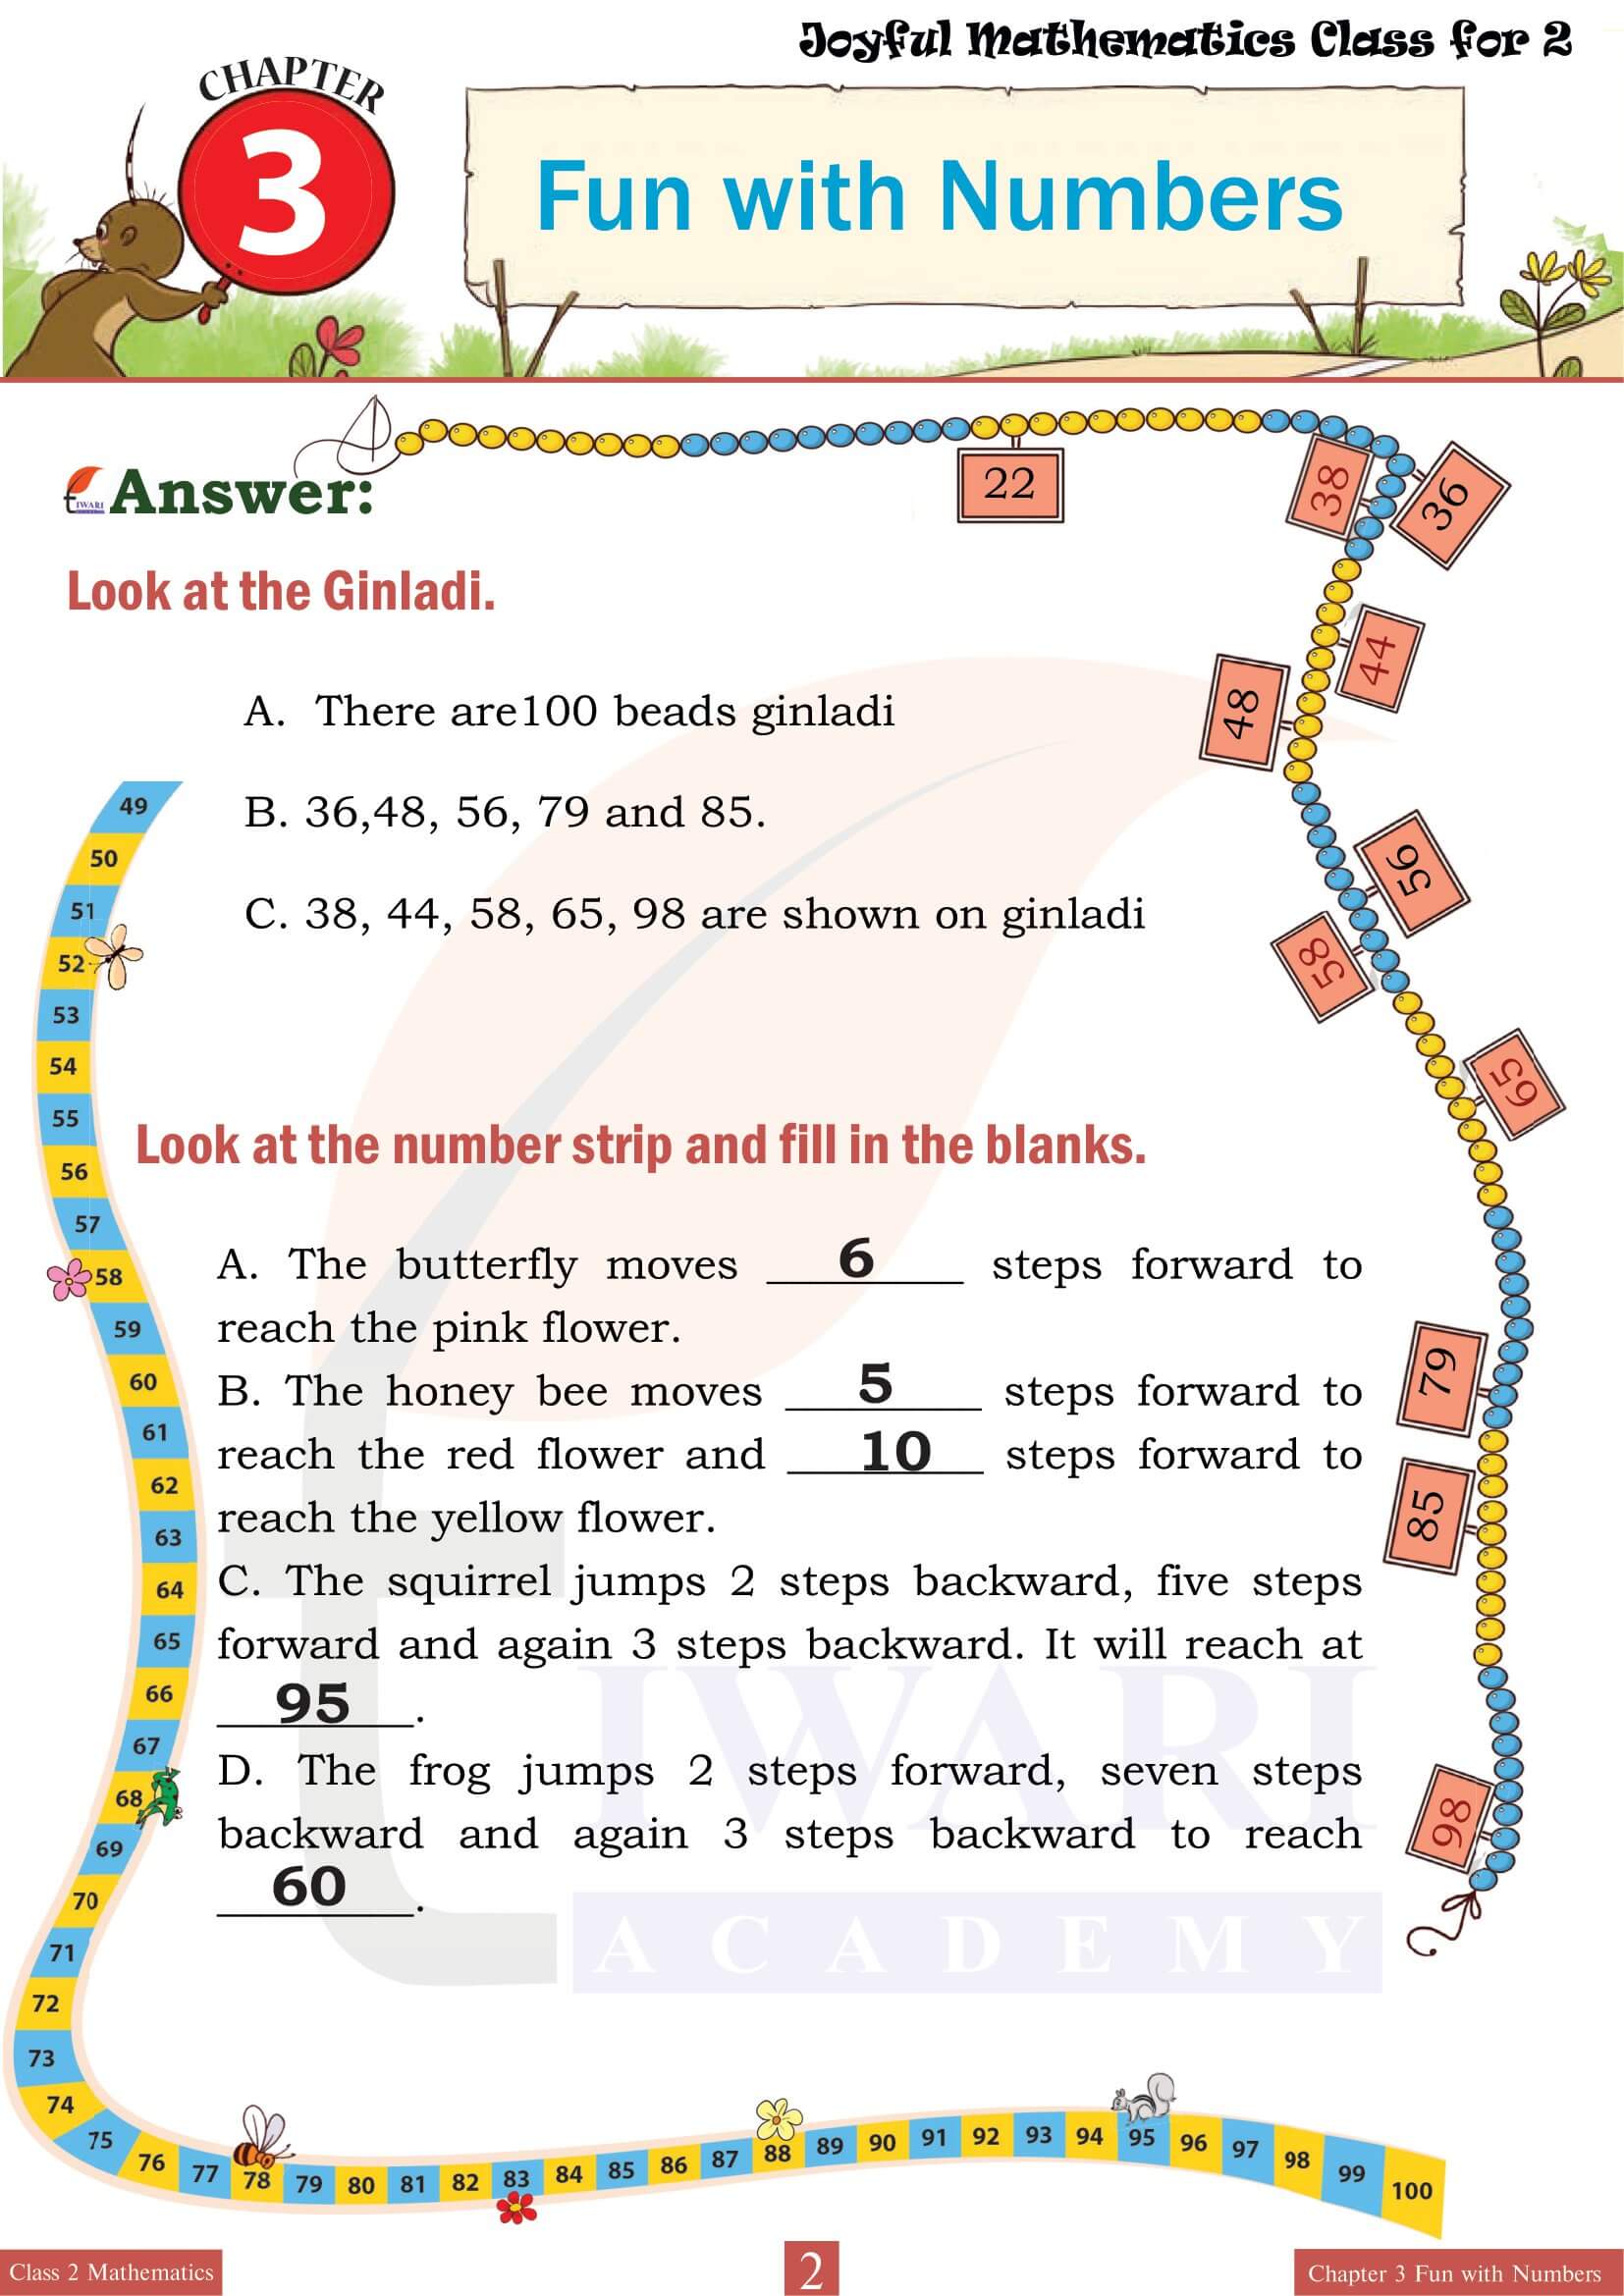 NCERT Solutions for Class 2 Joyful Maths Chapter 3 Fun with Numbers